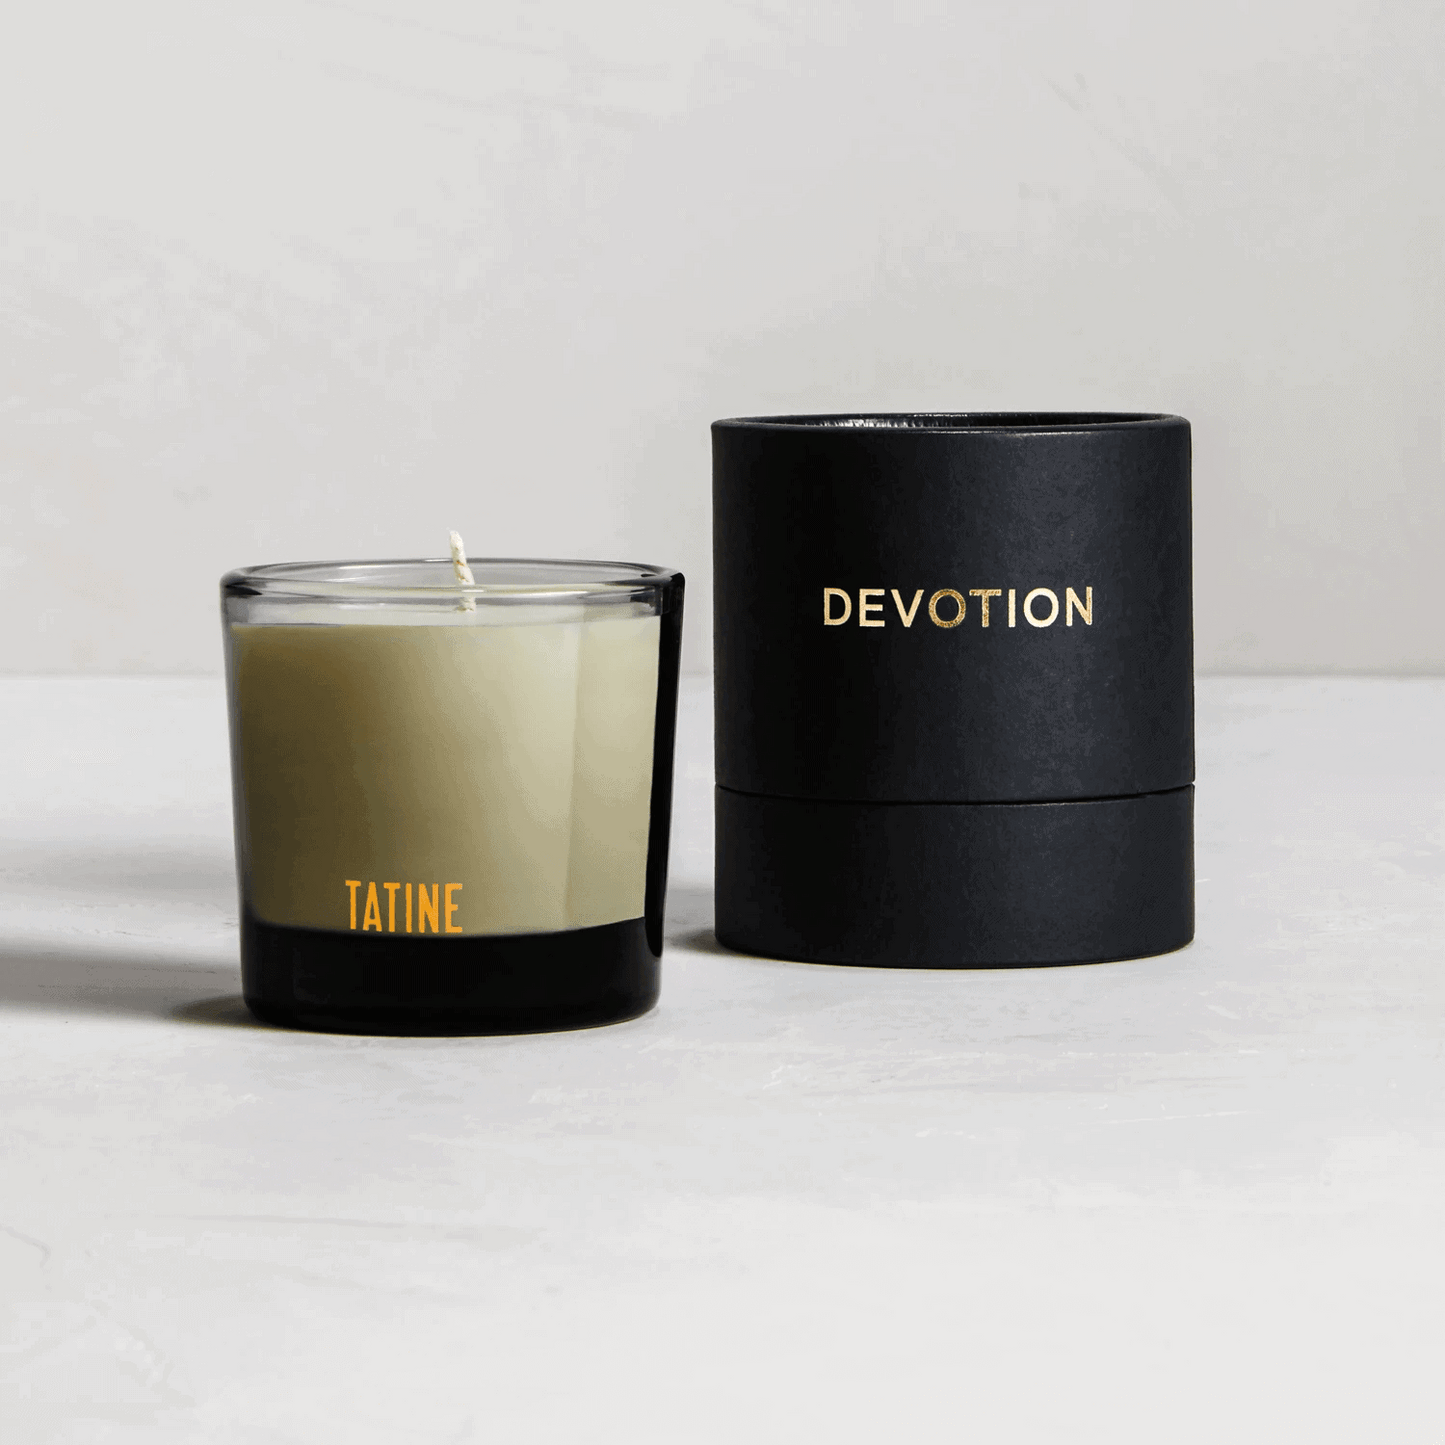 Devotion Scented Candle by Tatine